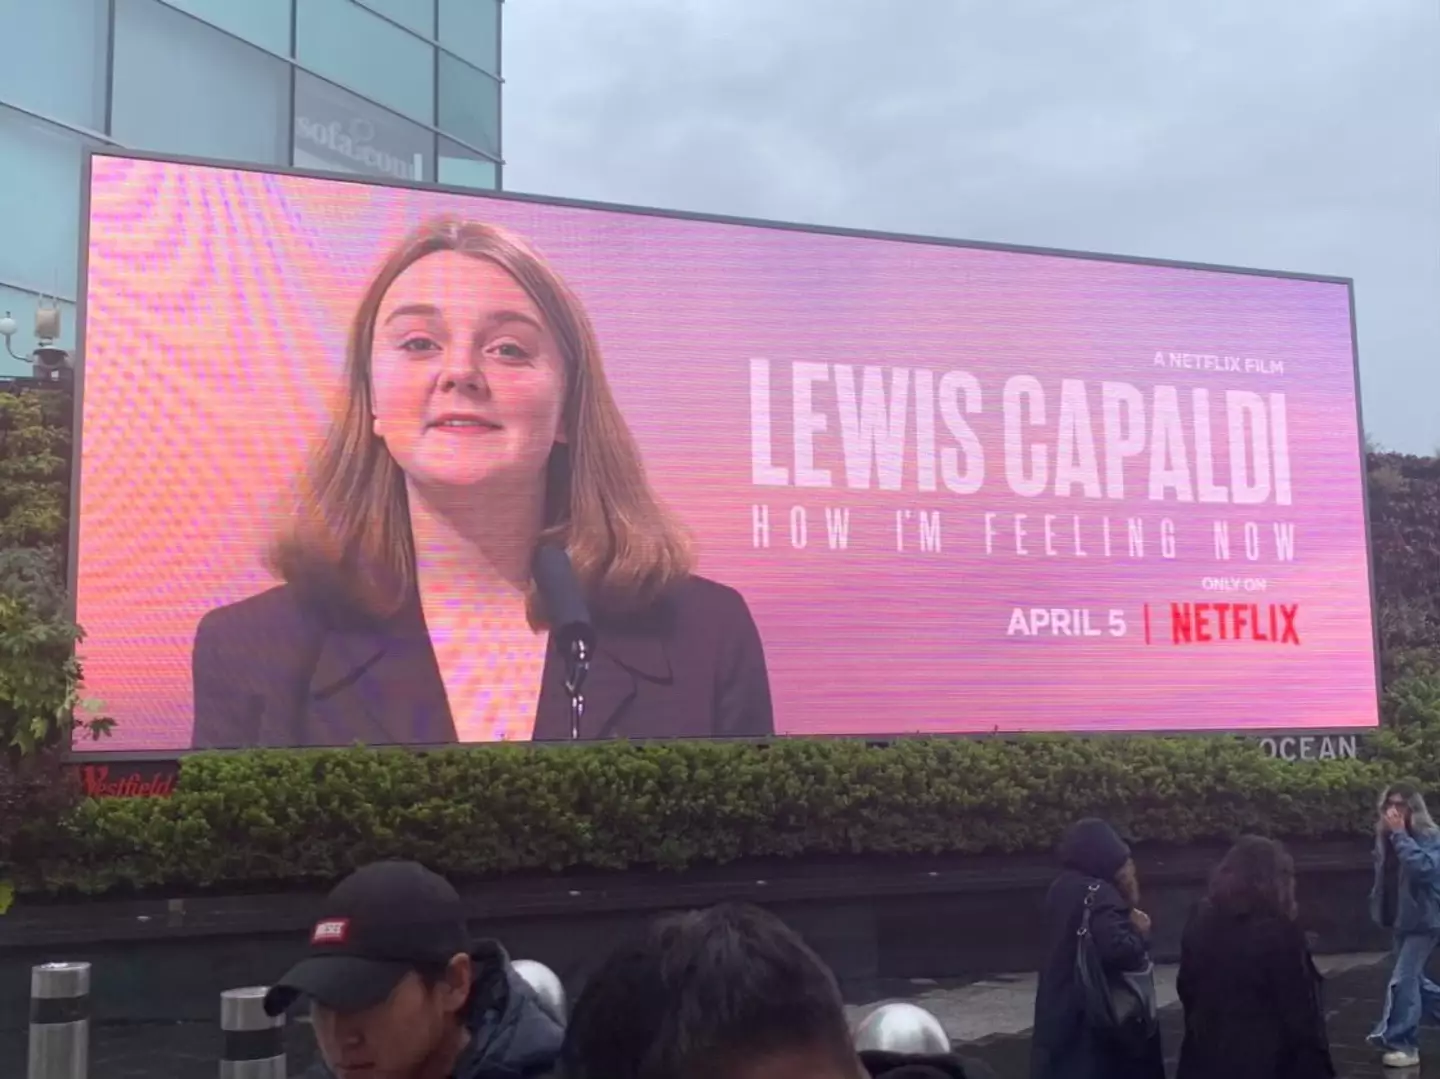 The billboard featured an image of a young Liz Truss.